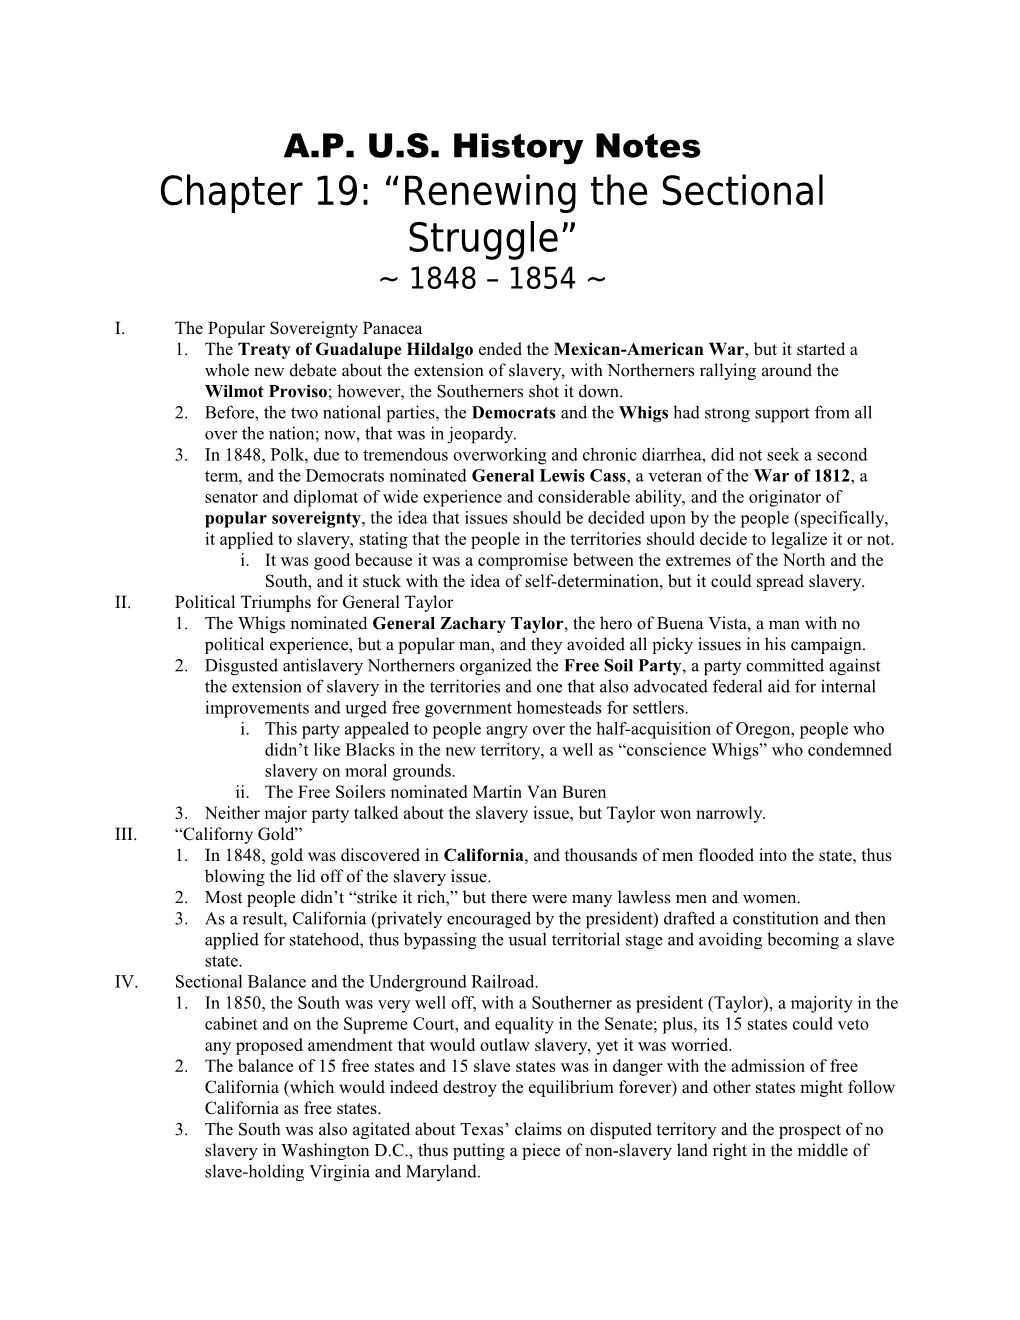 Chapter 19: Renewing the Sectional Struggle